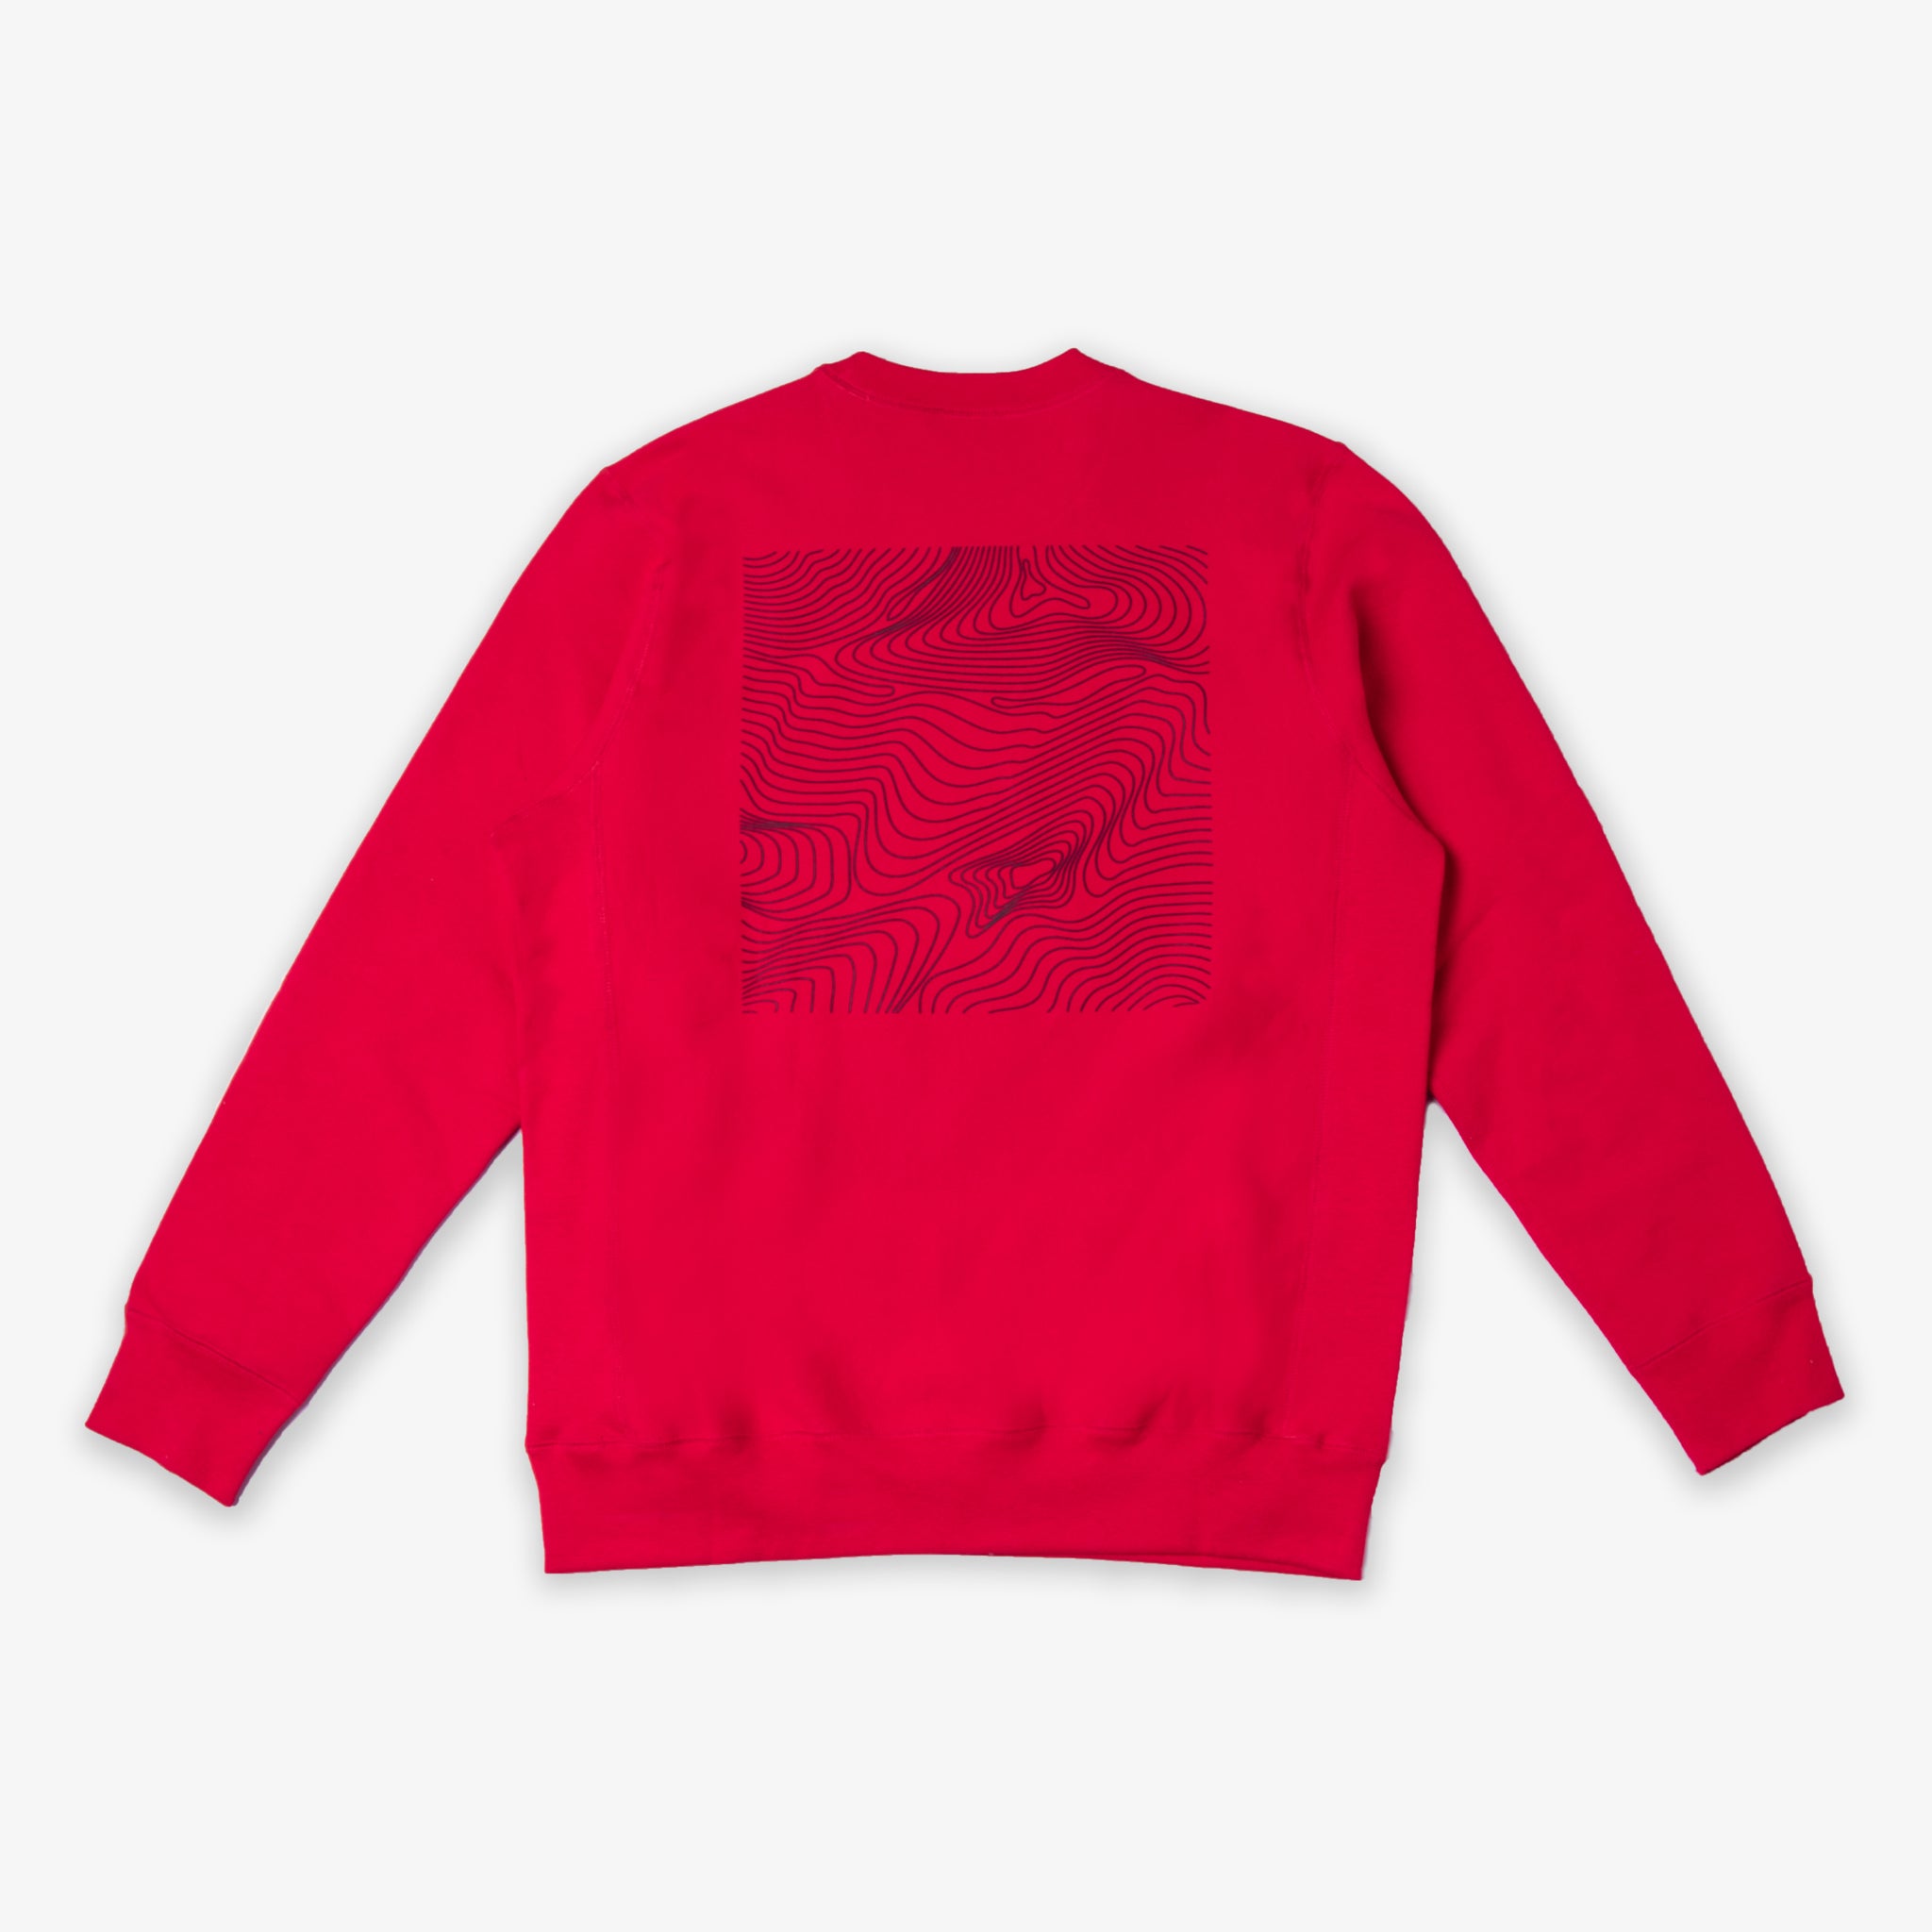 ARMOIRE The World Belongs to the Creators Crewneck - Red